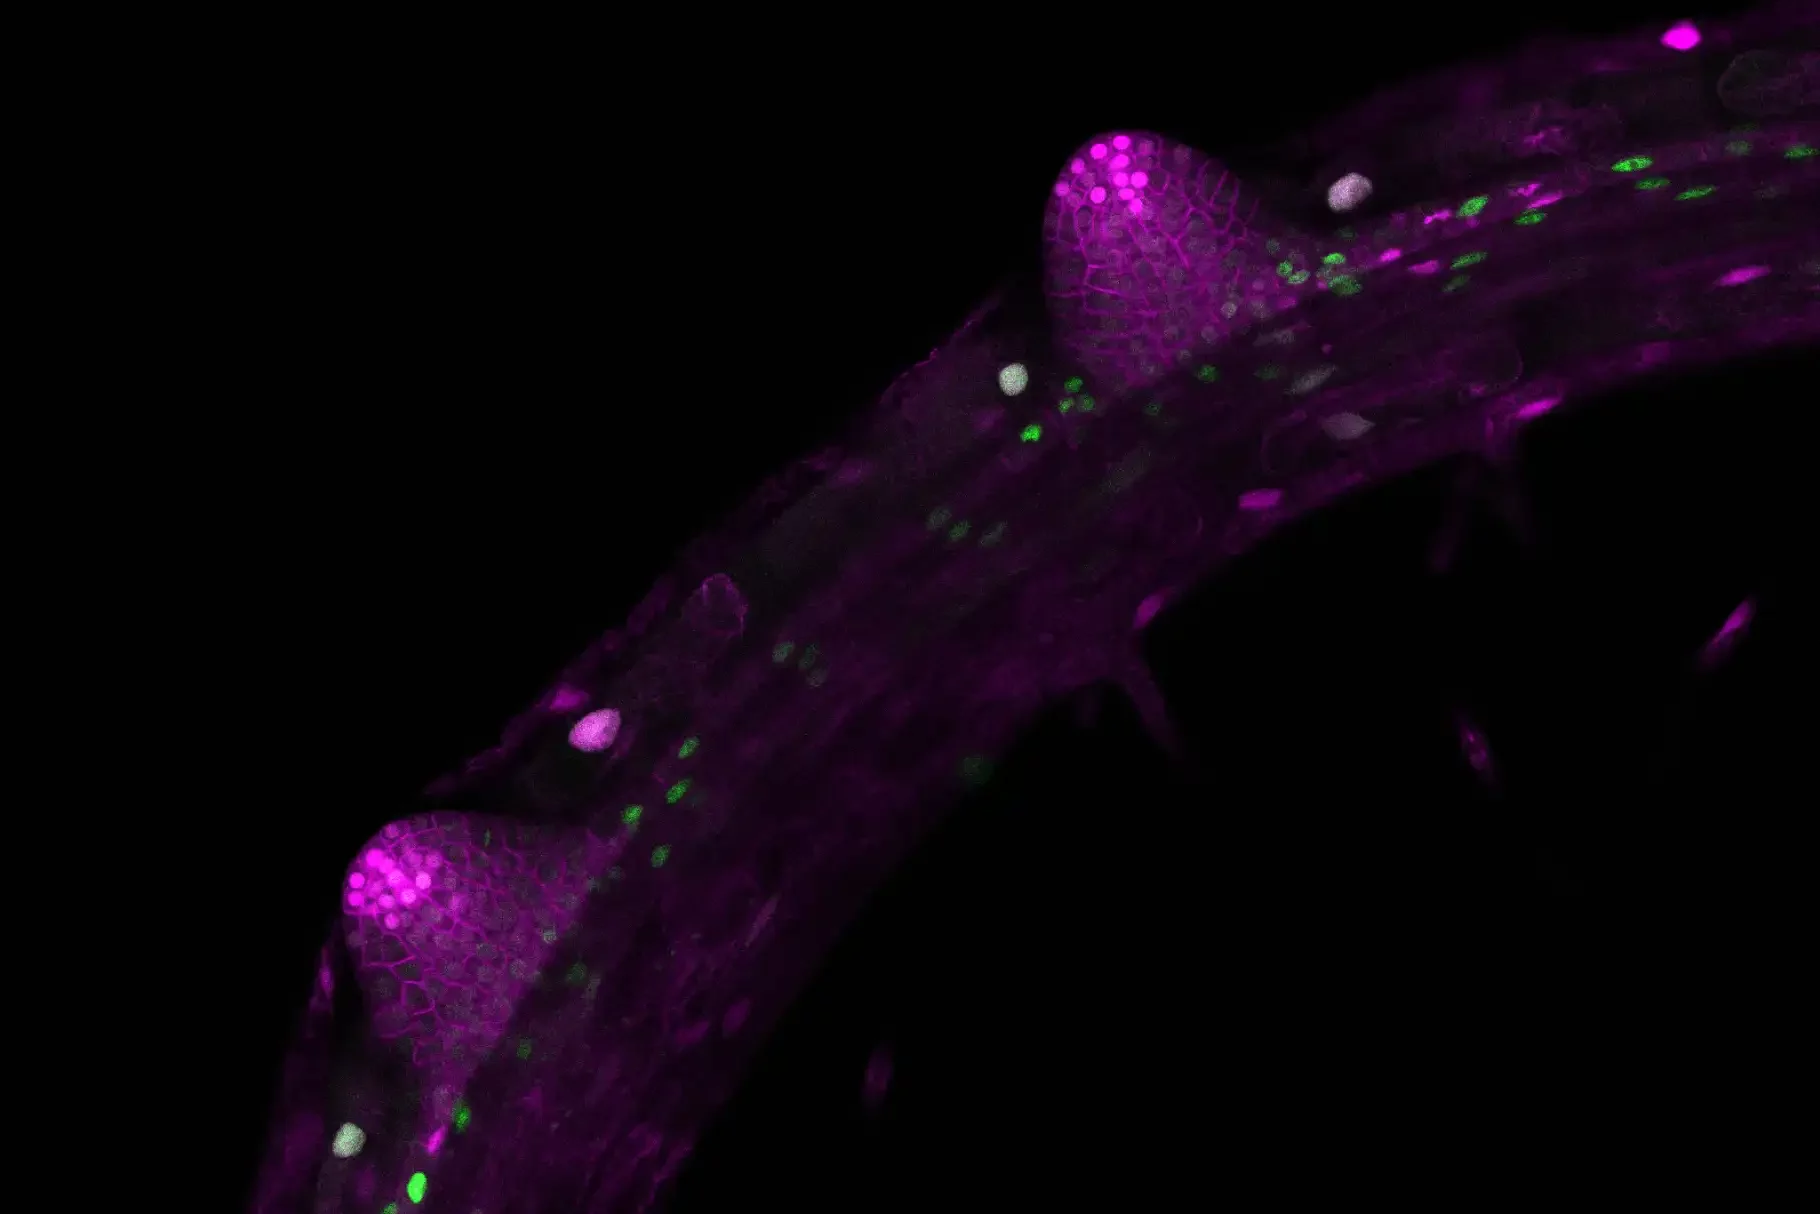 Image: Two lateral root primordia develop from the main root of Arabidopsis thaliana. The images (with false colours) were taken with a confocal microscope. Credit: Michael Stitz, Heidelberg University